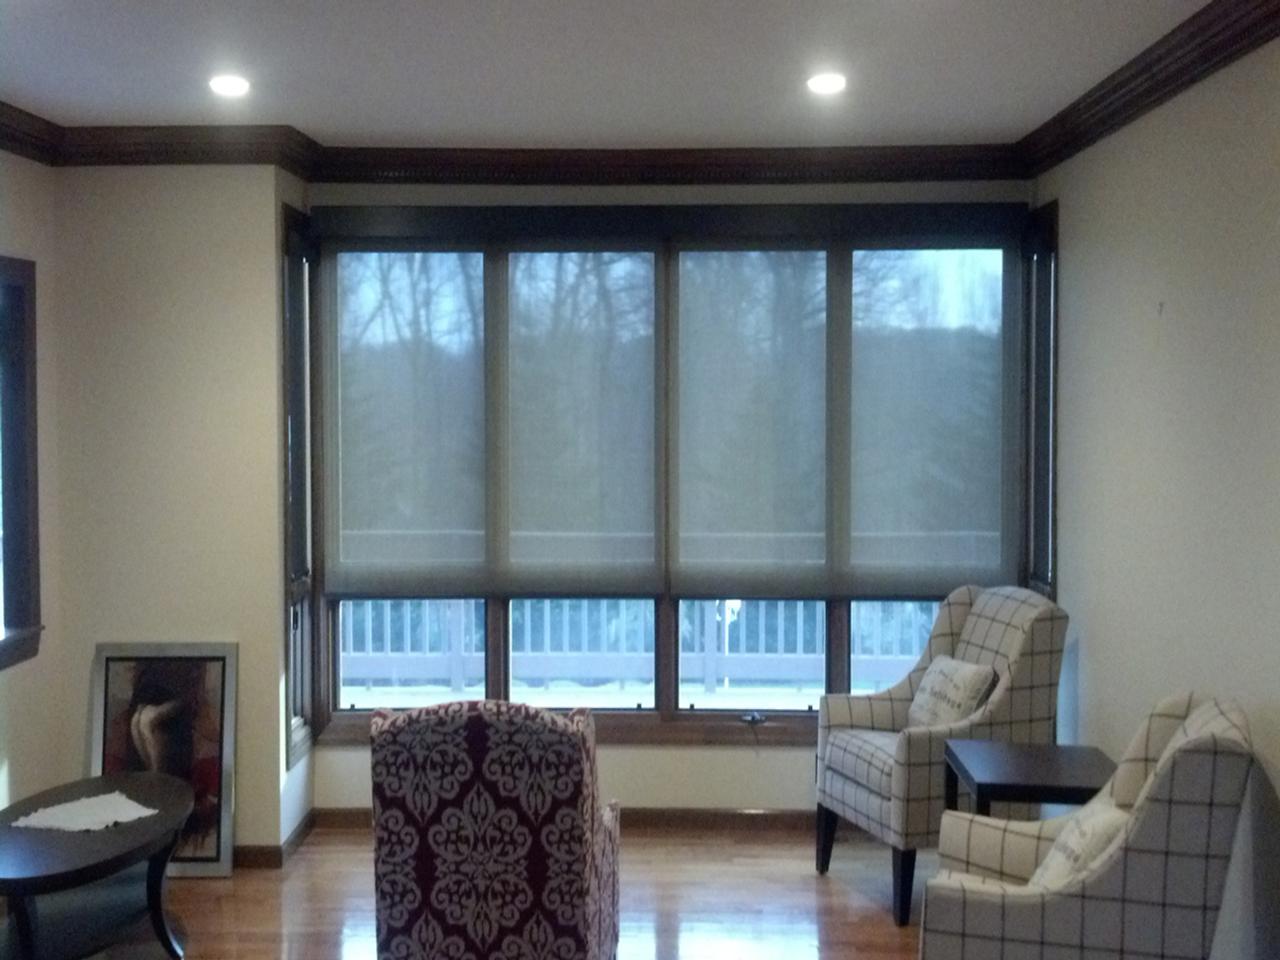 Screen roller shades in living room